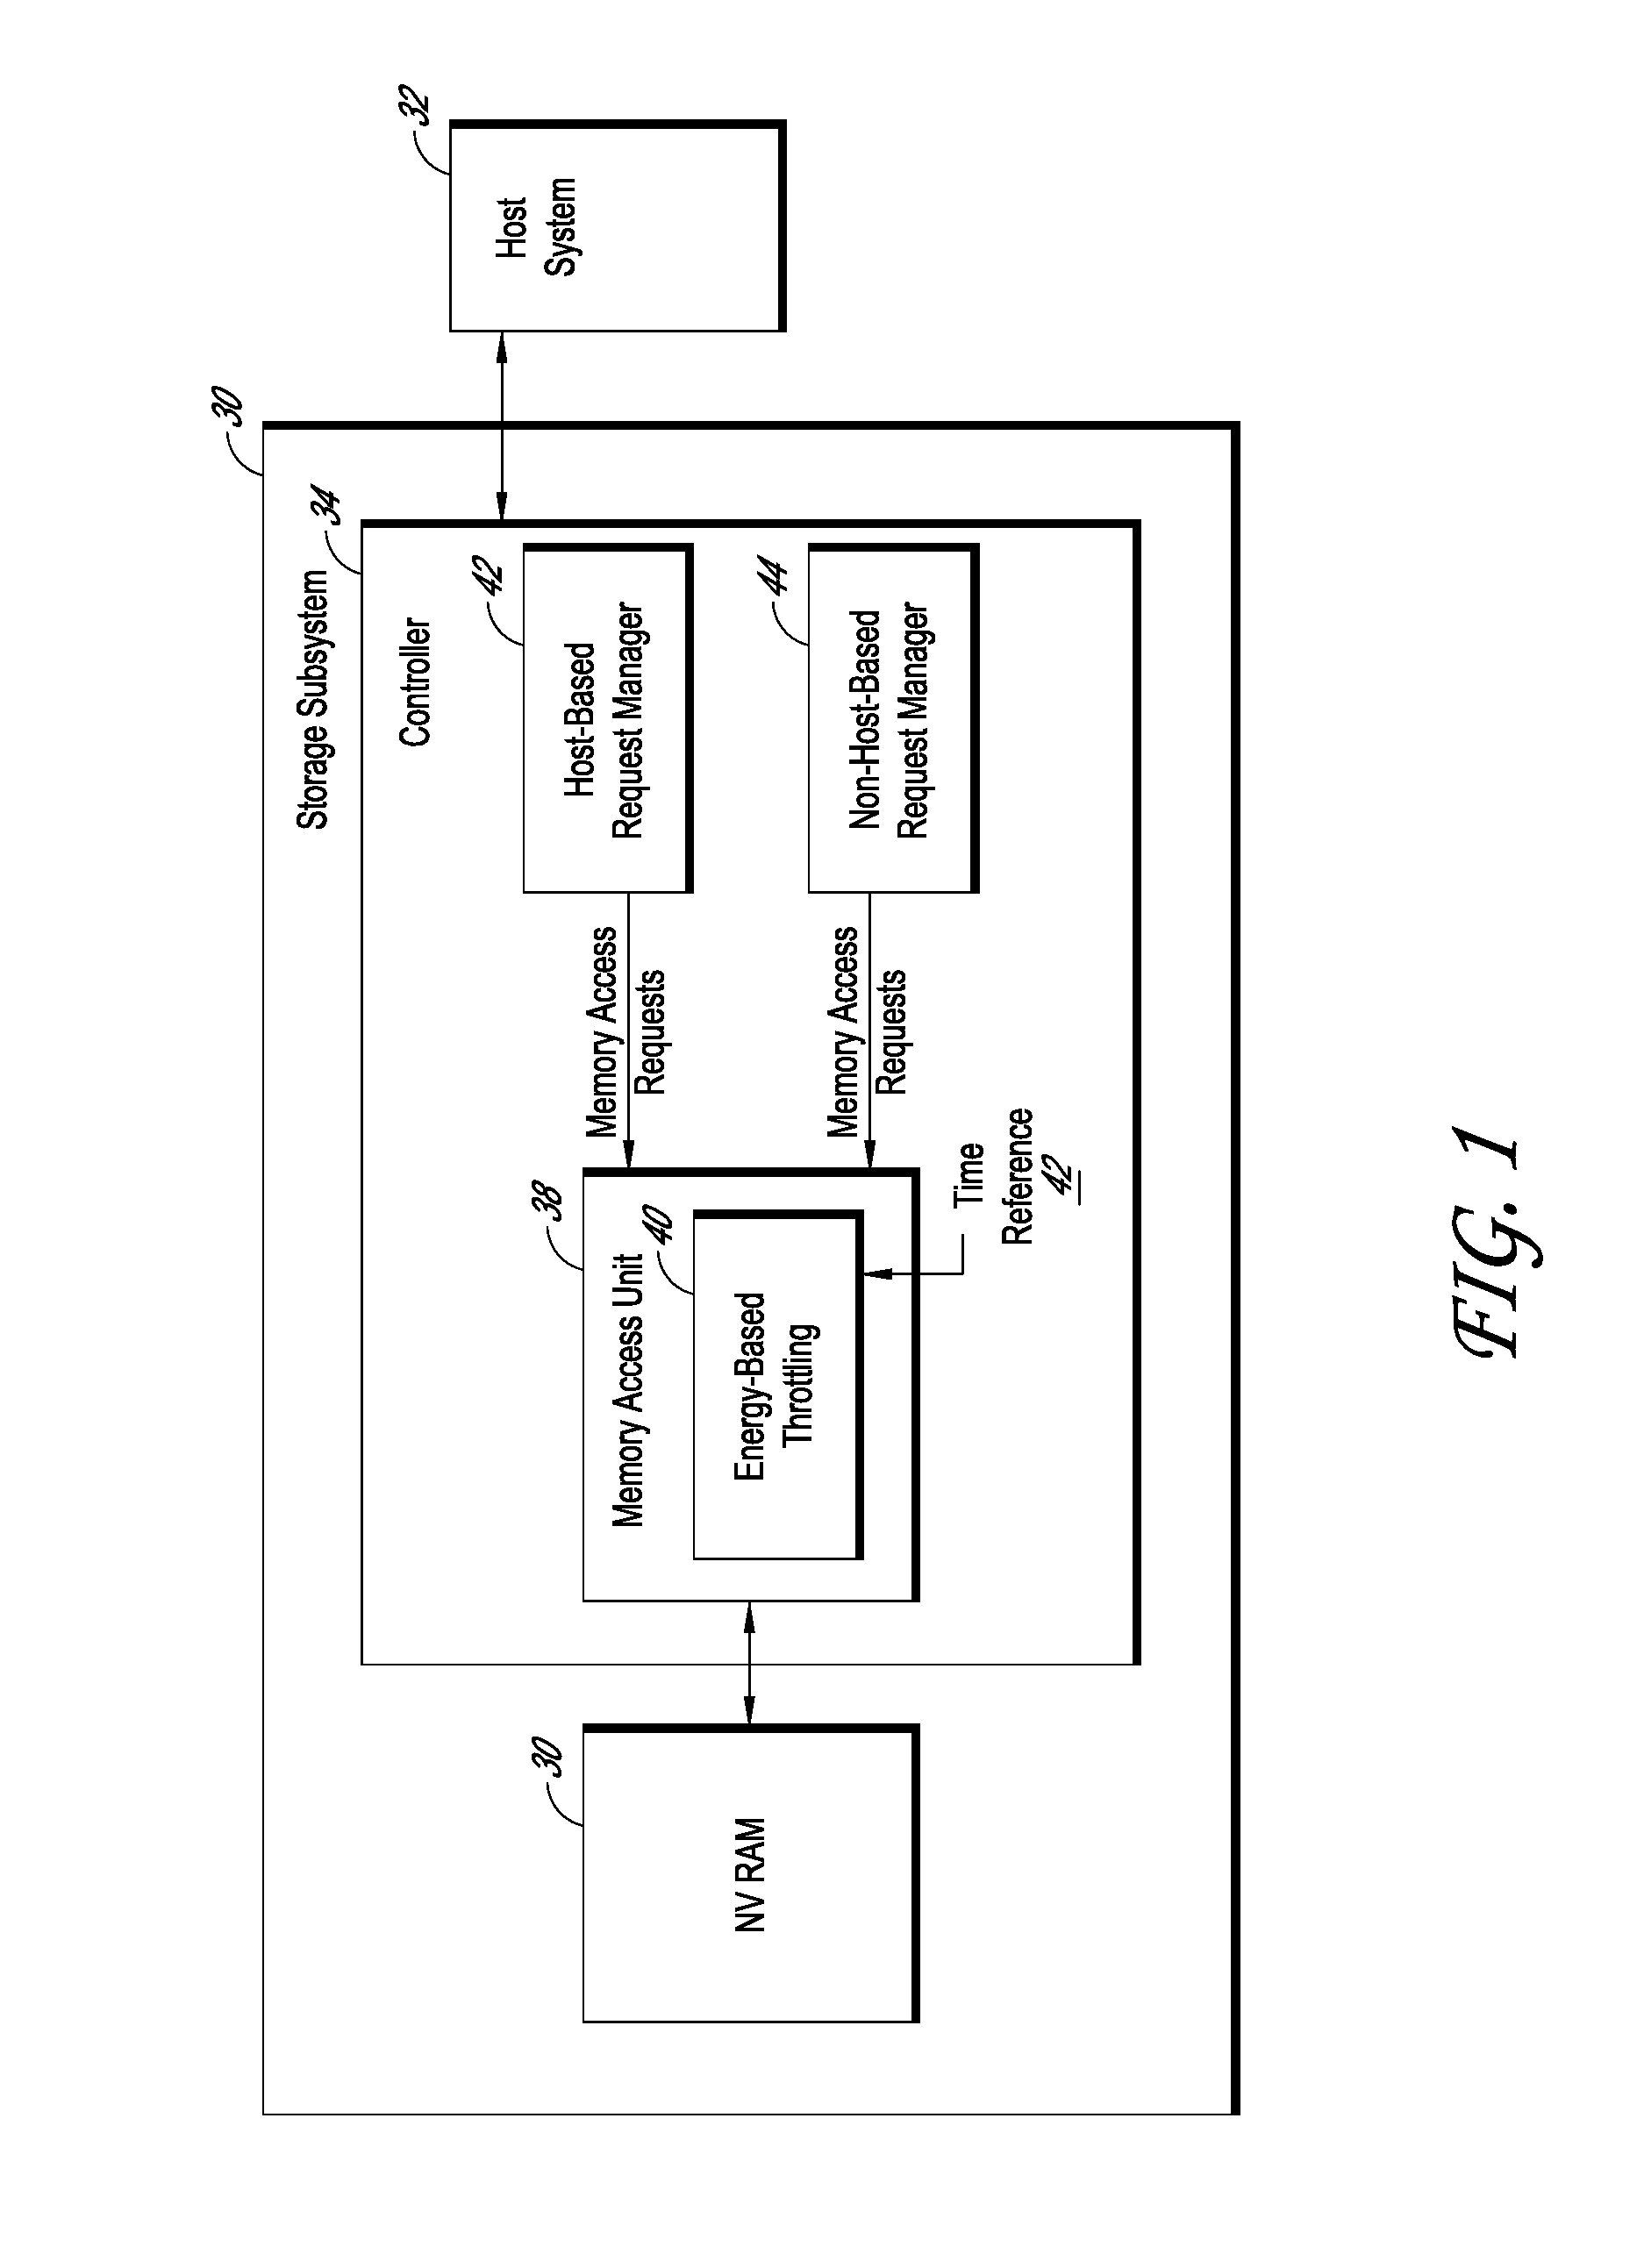 Non-volatile storage subsystem with energy-based performance throttling